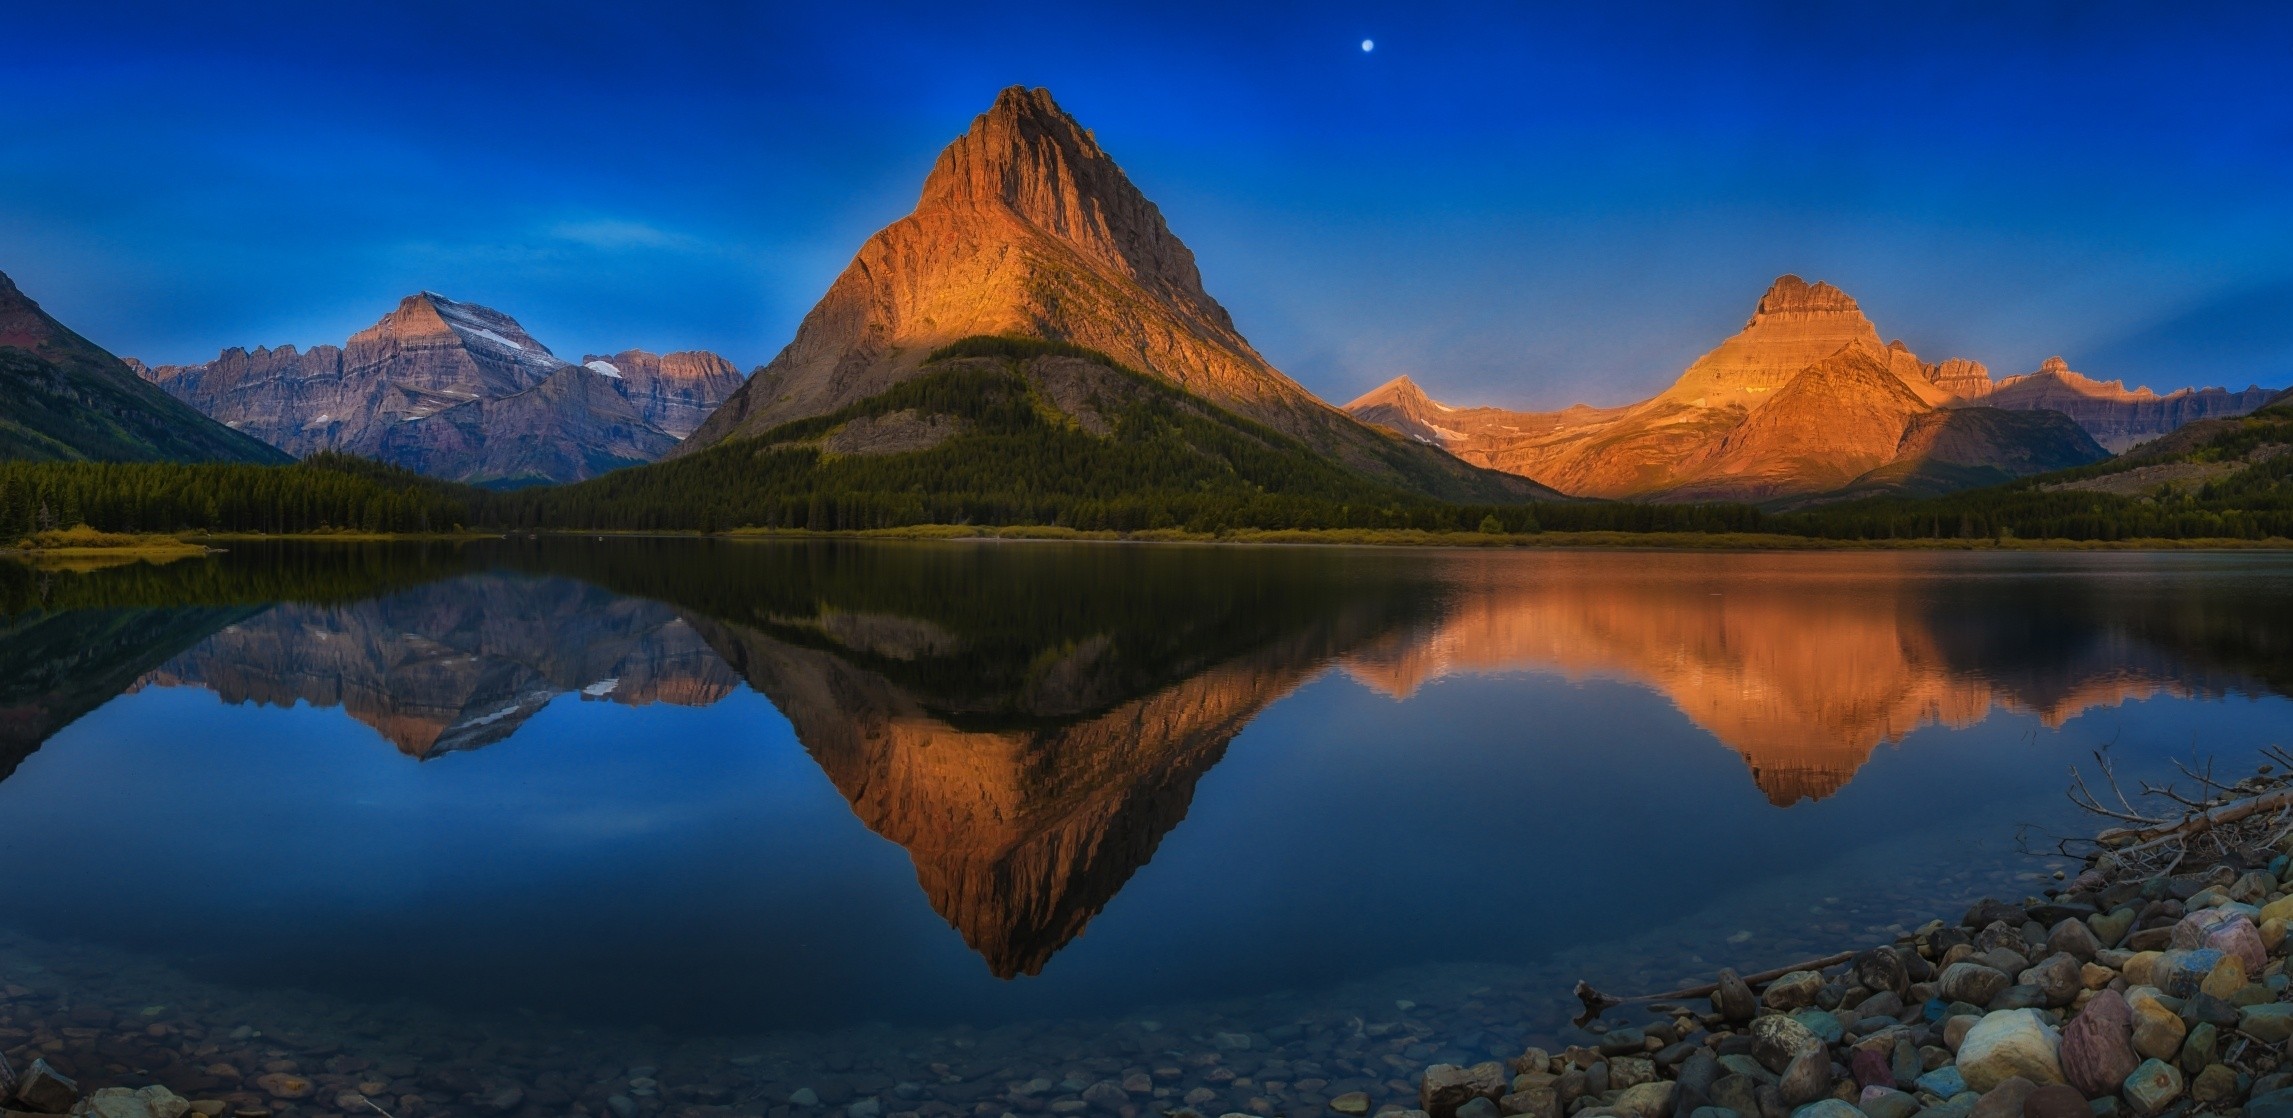 General 2293x1118 lake mountains reflection Moon forest summer blue water stones Glacier National Park Montana nature landscape sunset 4K USA Swiftcurrent Lake